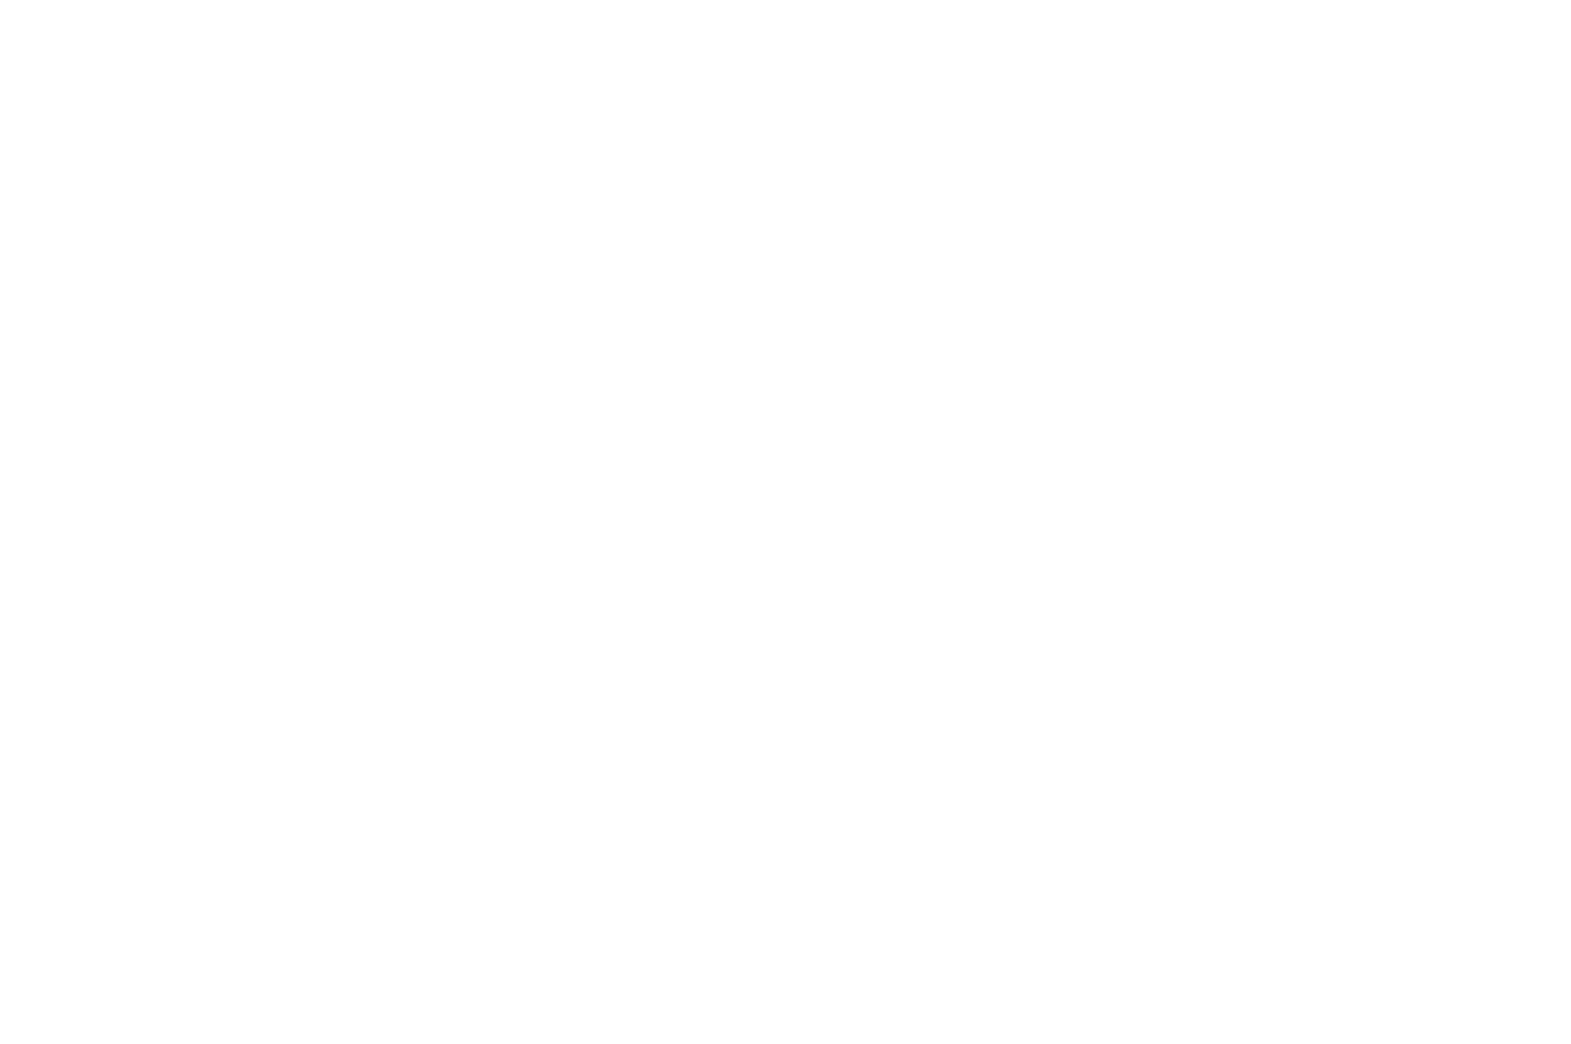 The 44 Collective